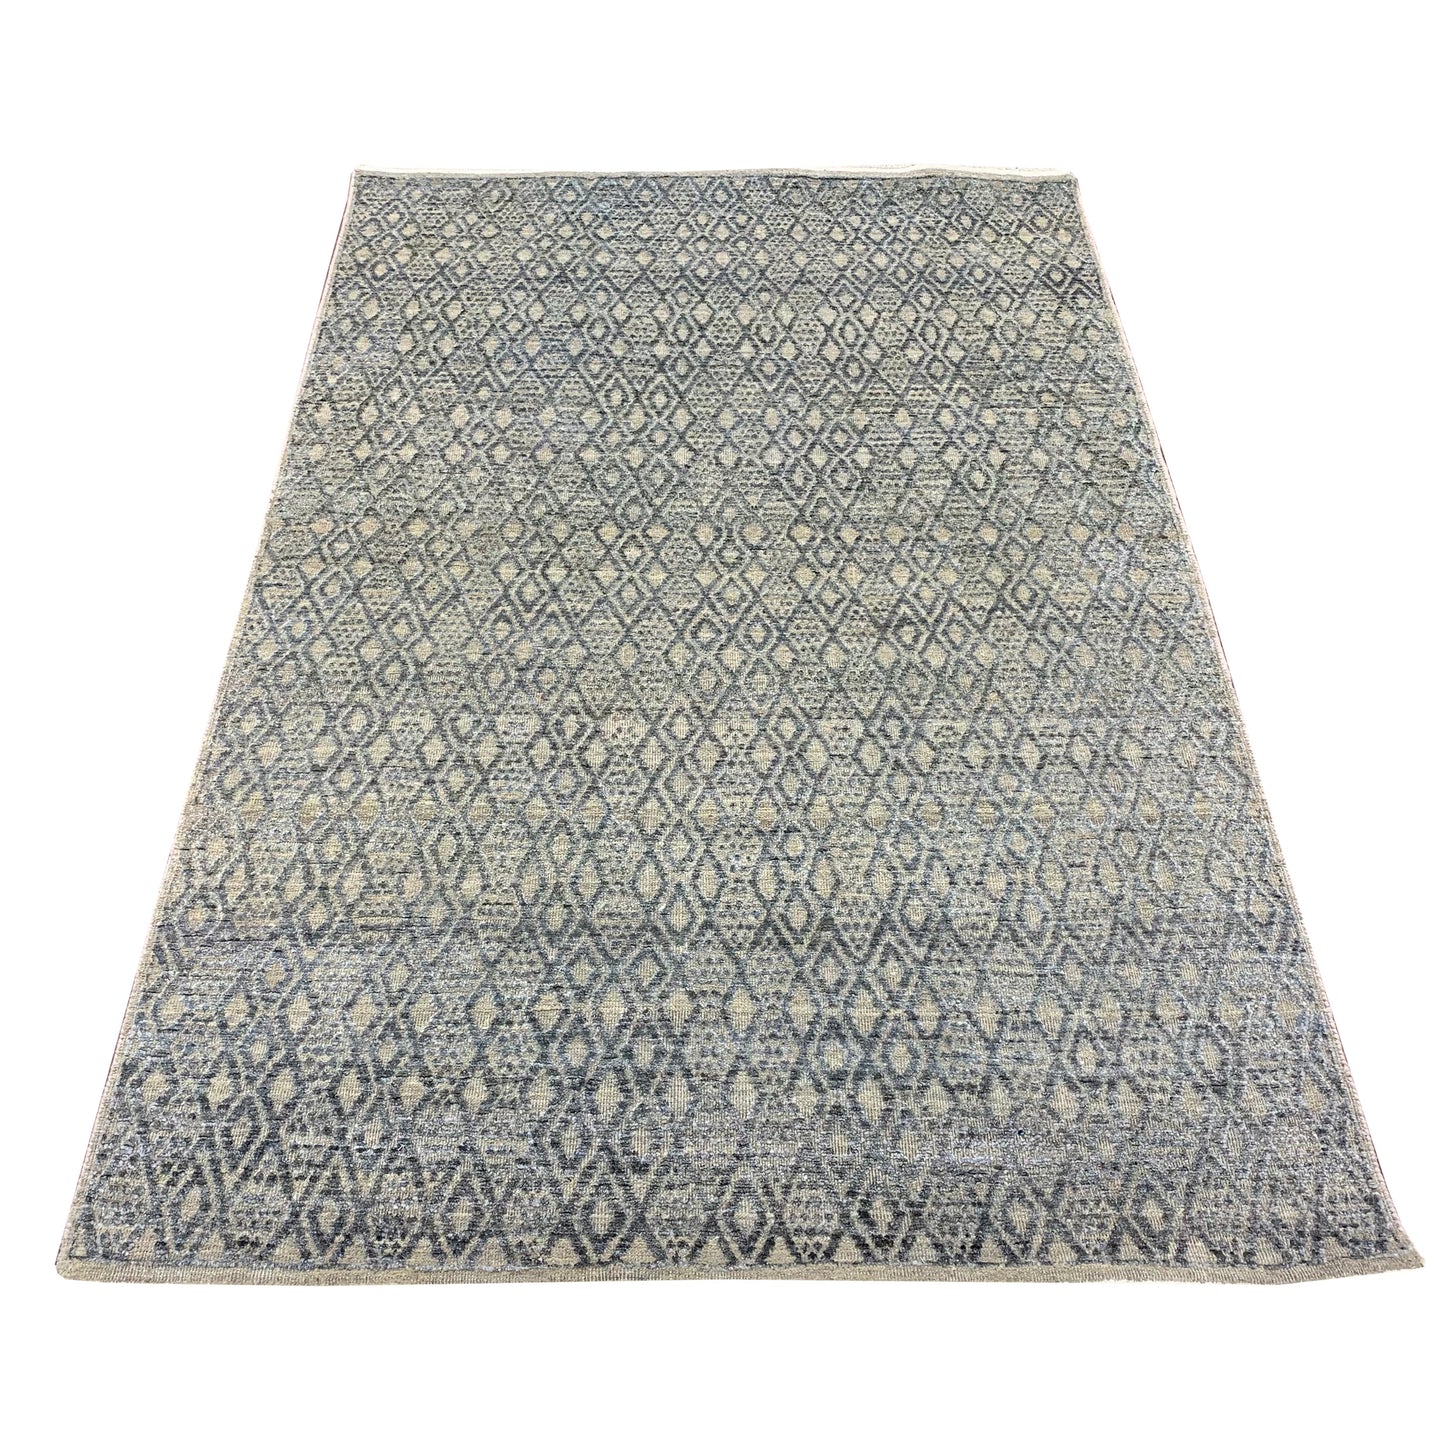 Get trendy with Grey Silk, Wool Modern Area Rug 3.11x6.2ft 120x188Cms - Modern Rugs available at Jaipur Oriental Rugs. Grab yours for $1299.00 today!